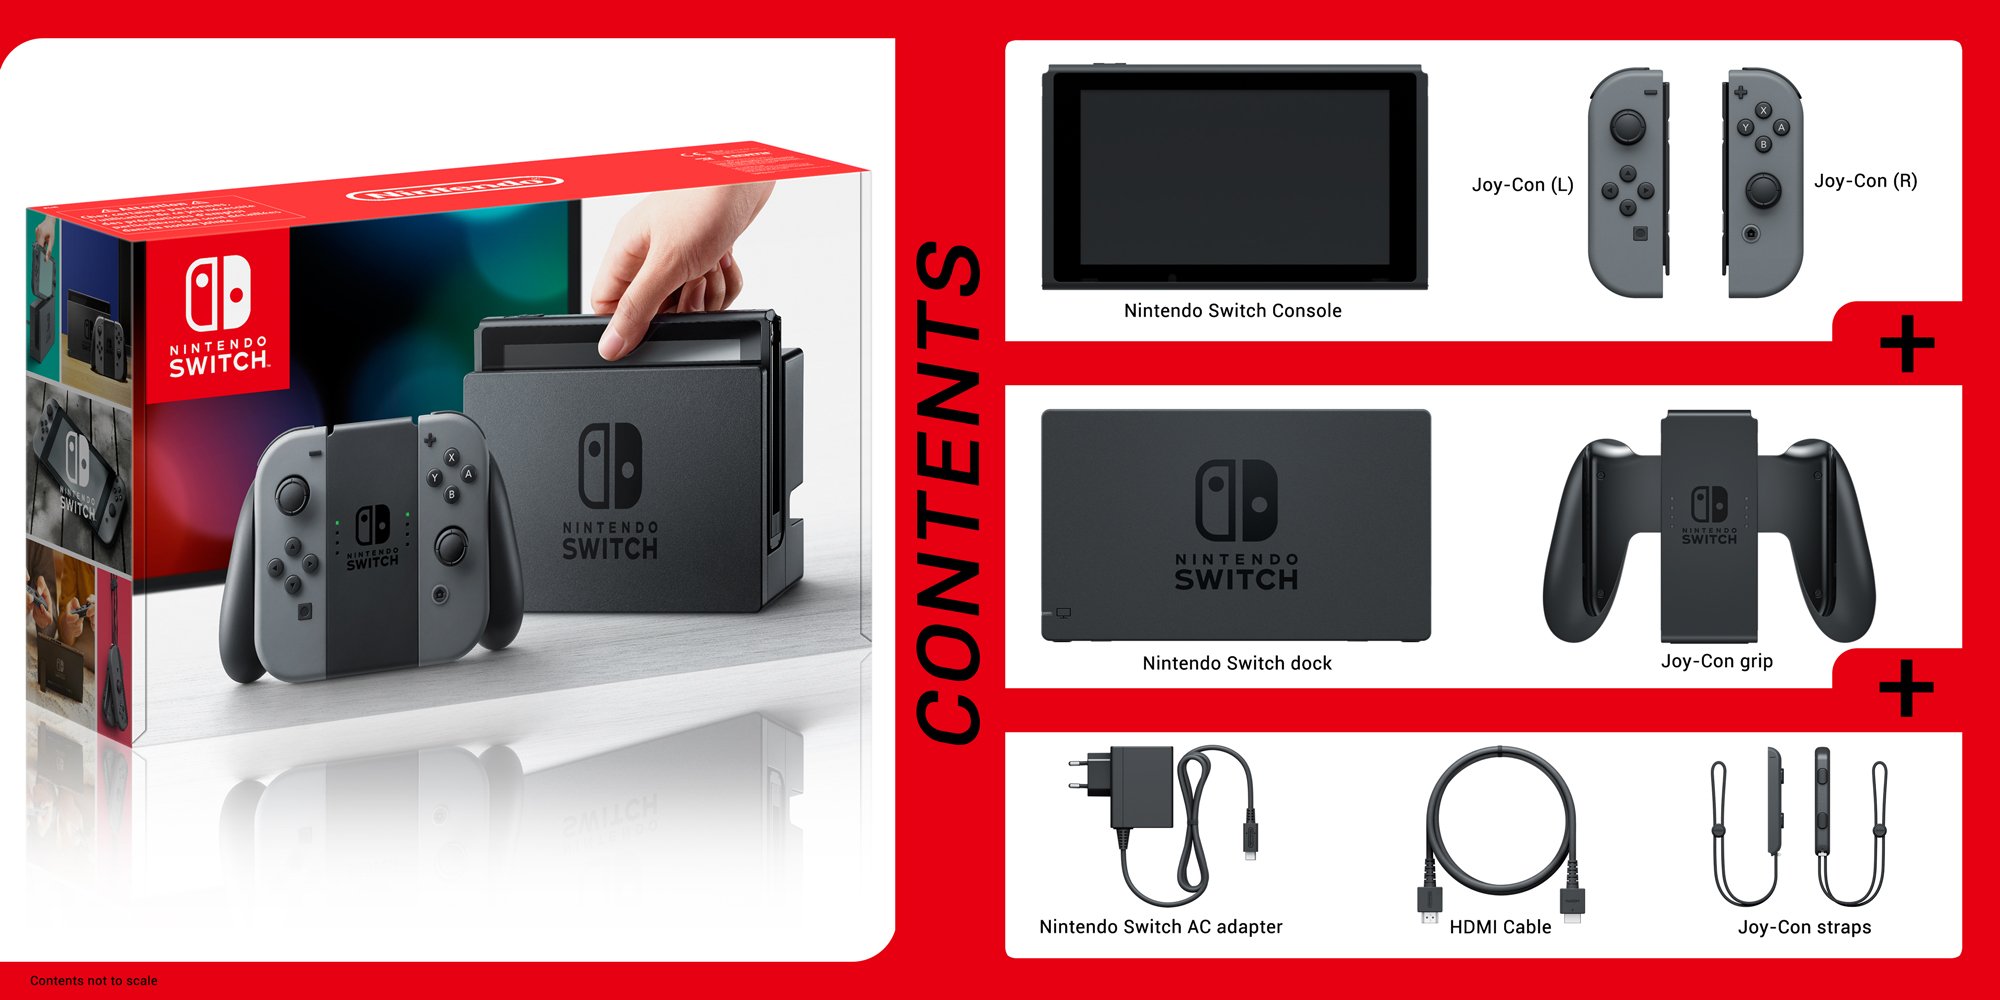 Nintendo of Europe on X: On 22/09, shiny packaged versions of